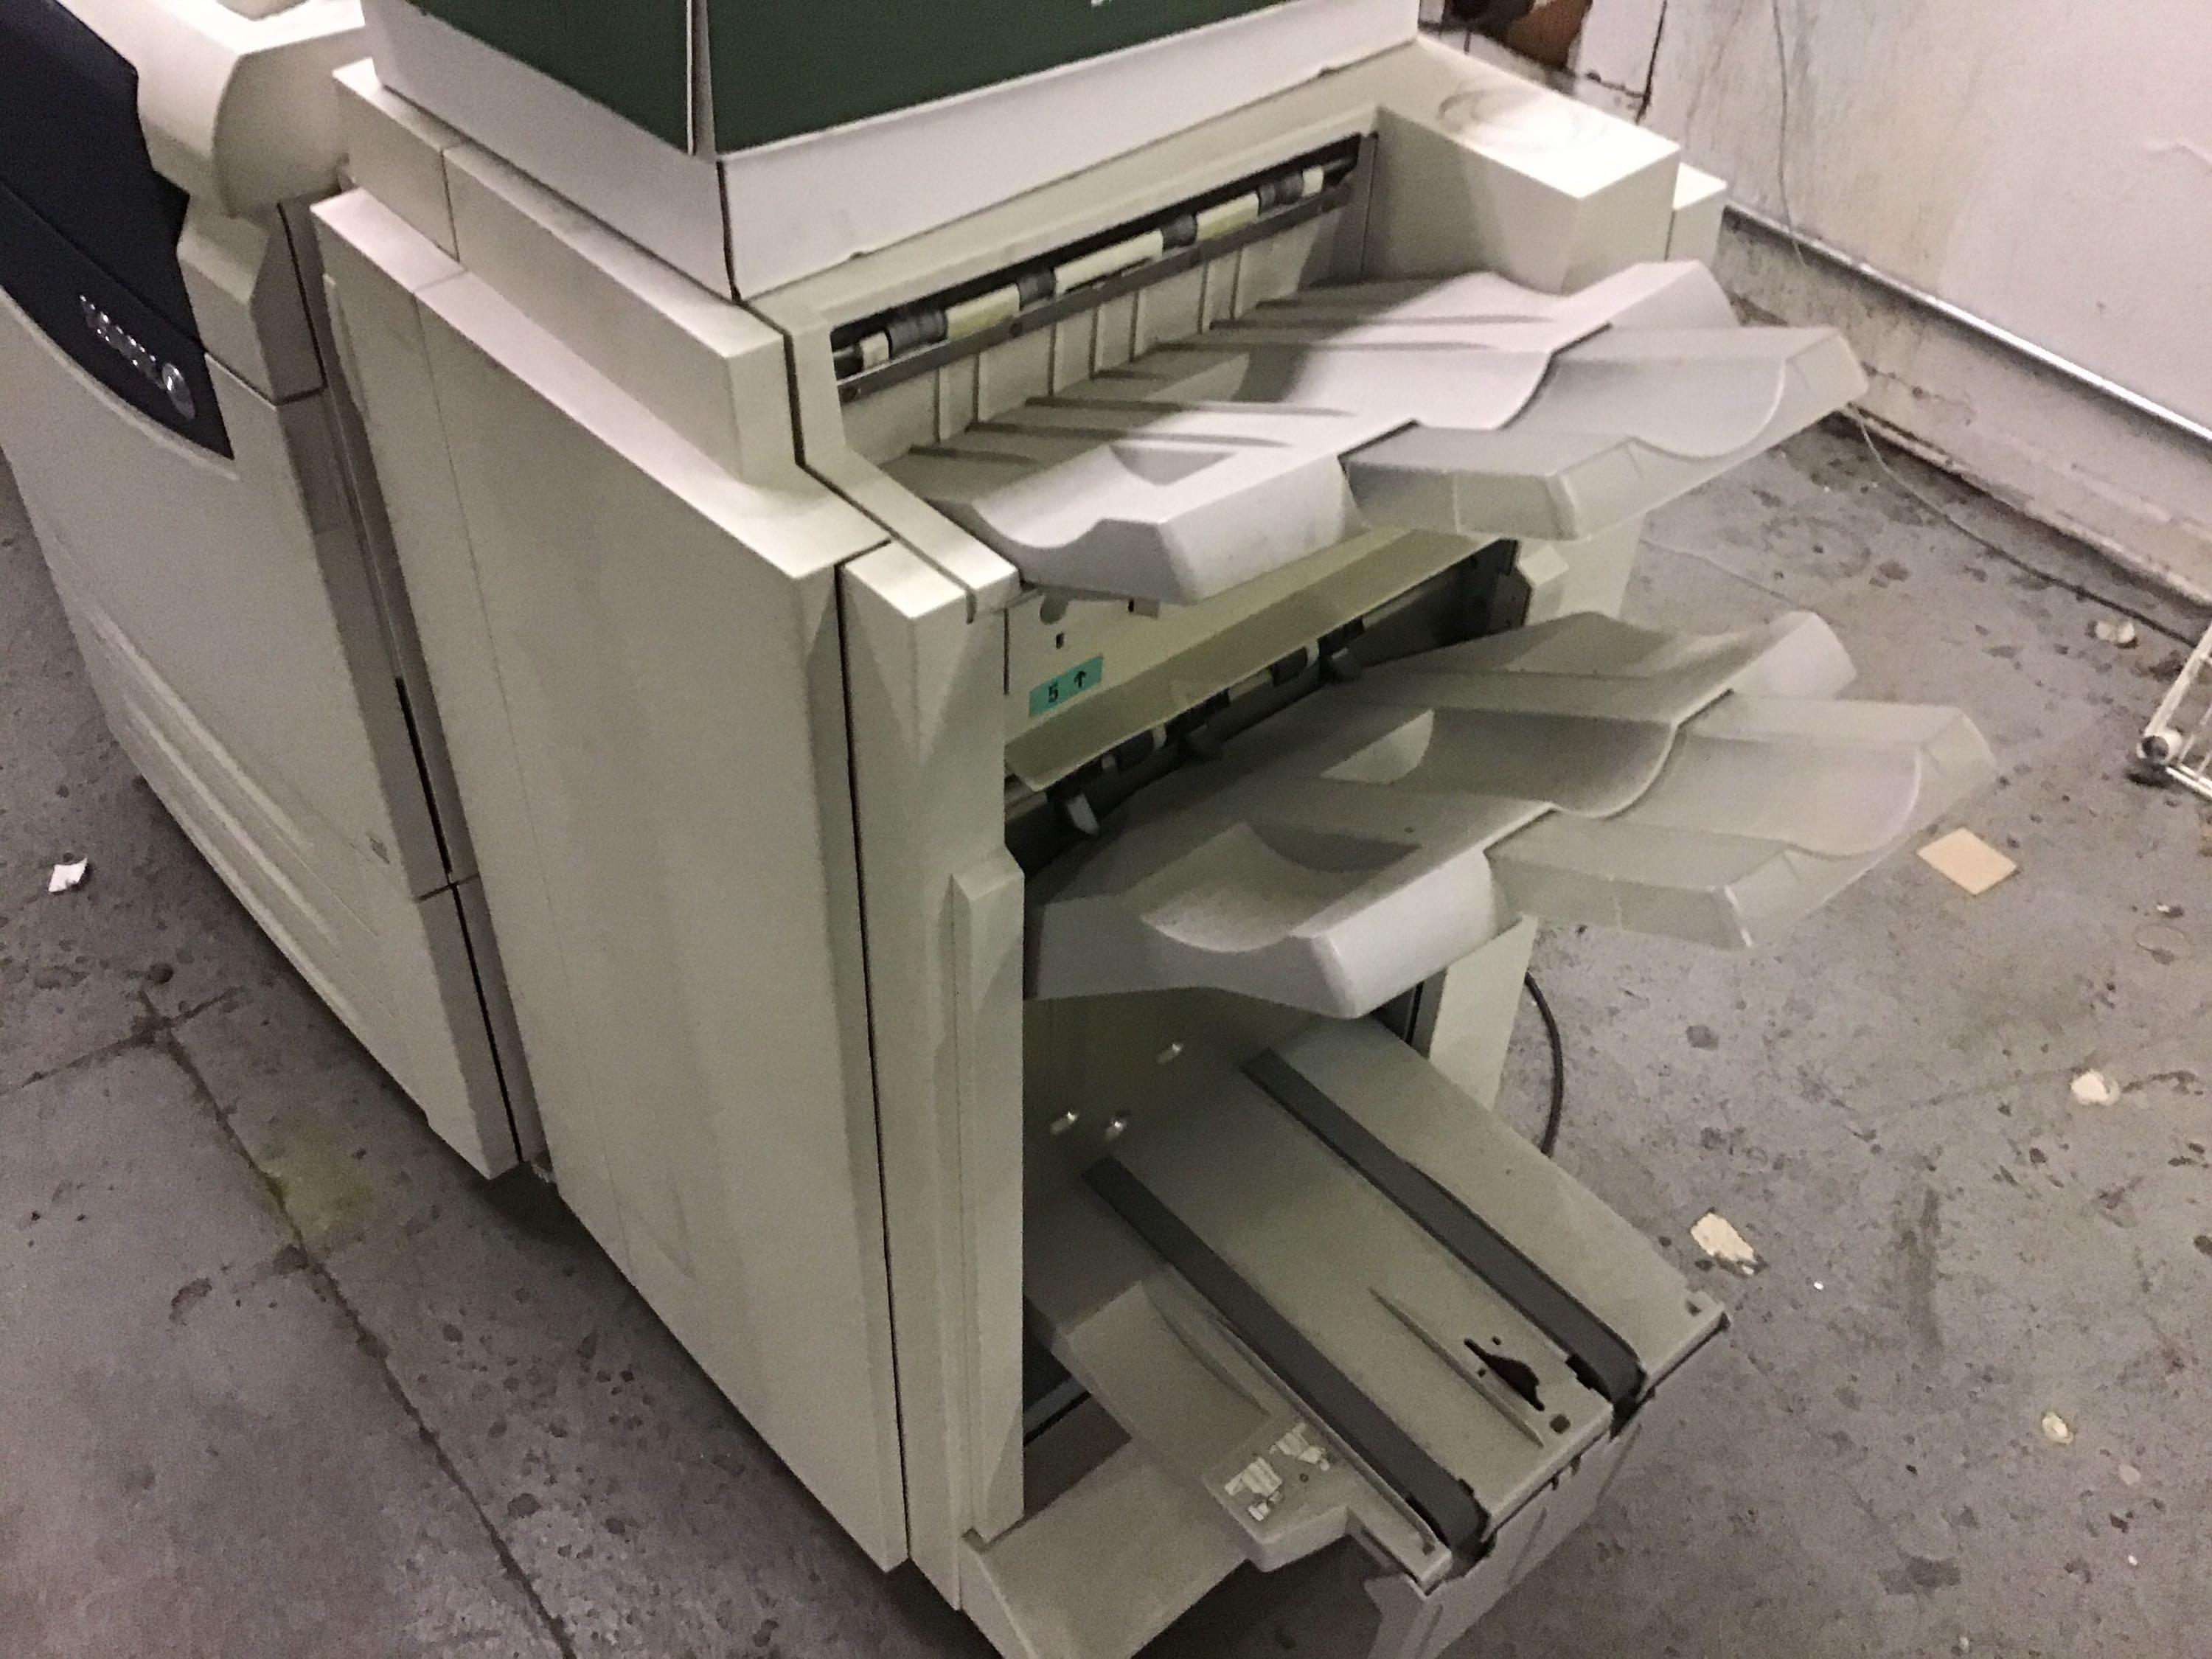 Xerox SFN-4 Finisher. This unit would not power on and appears to be a parts machine